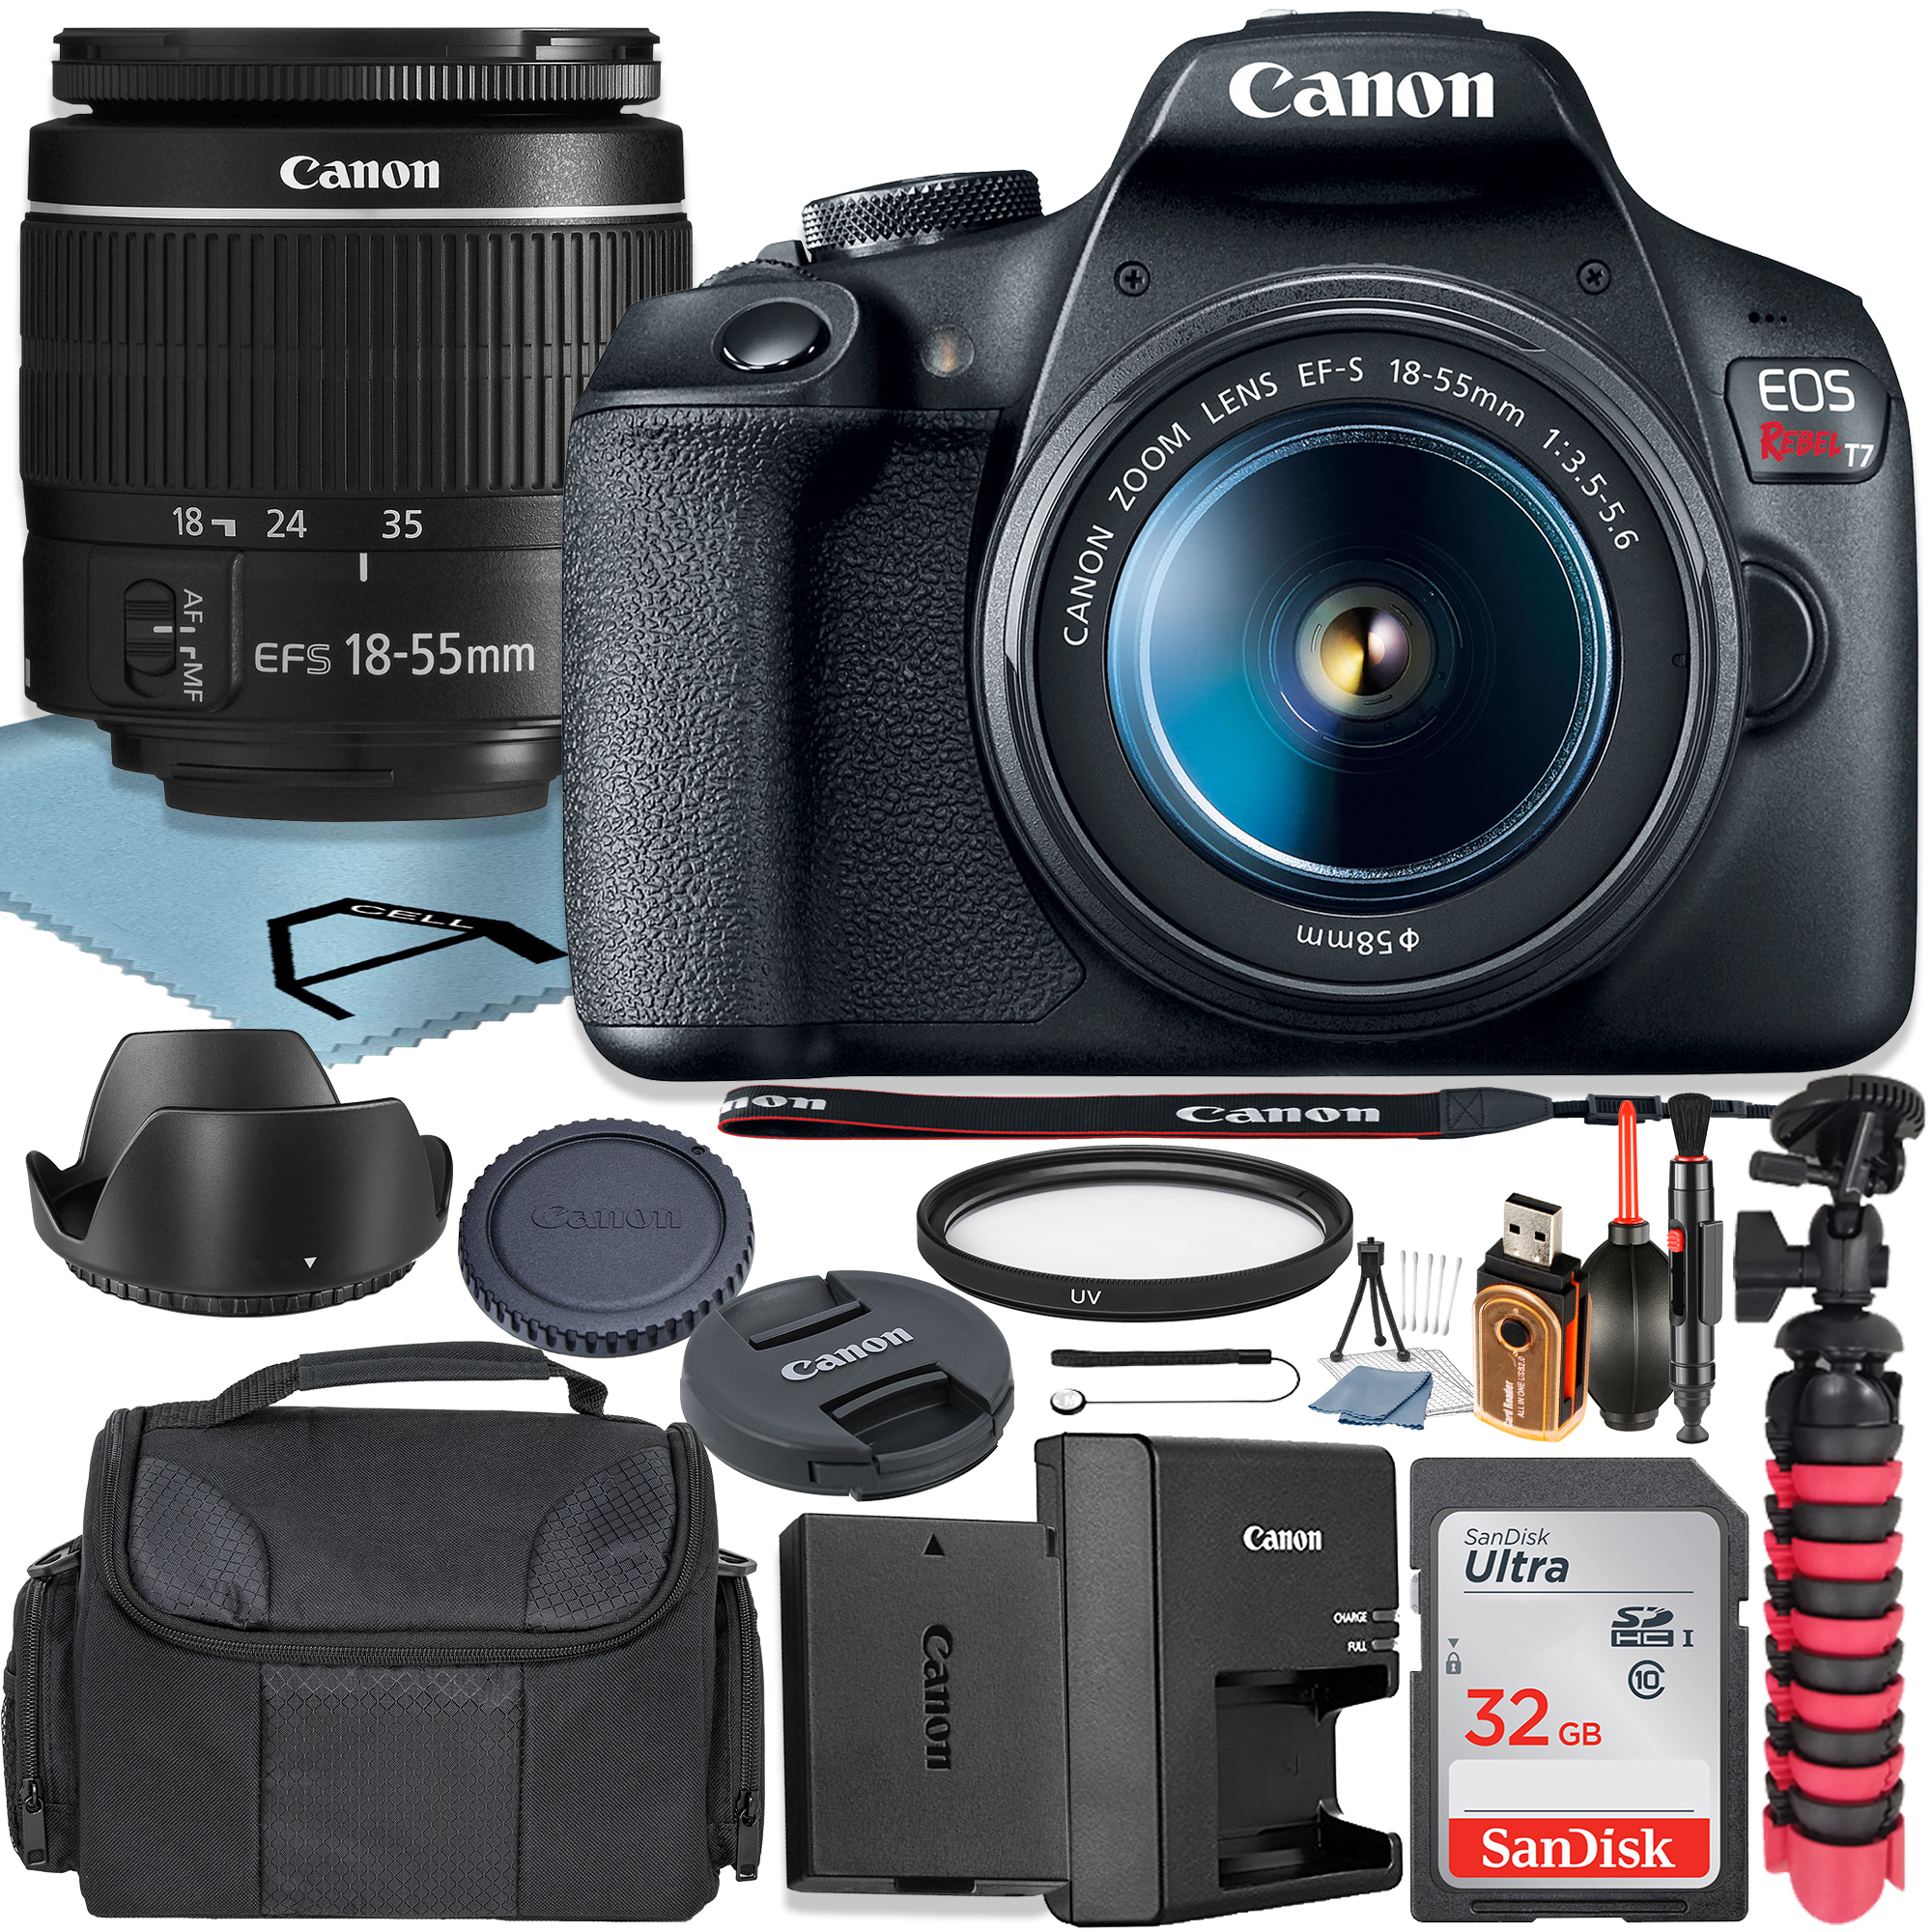 Canon EOS Rebel T7 DSLR Camera 24.1MP with 18-55mm Lens + SanDisk 32GB Memory Card + Case + Tripod + UV Filter + A-Cell Accessory Bundle